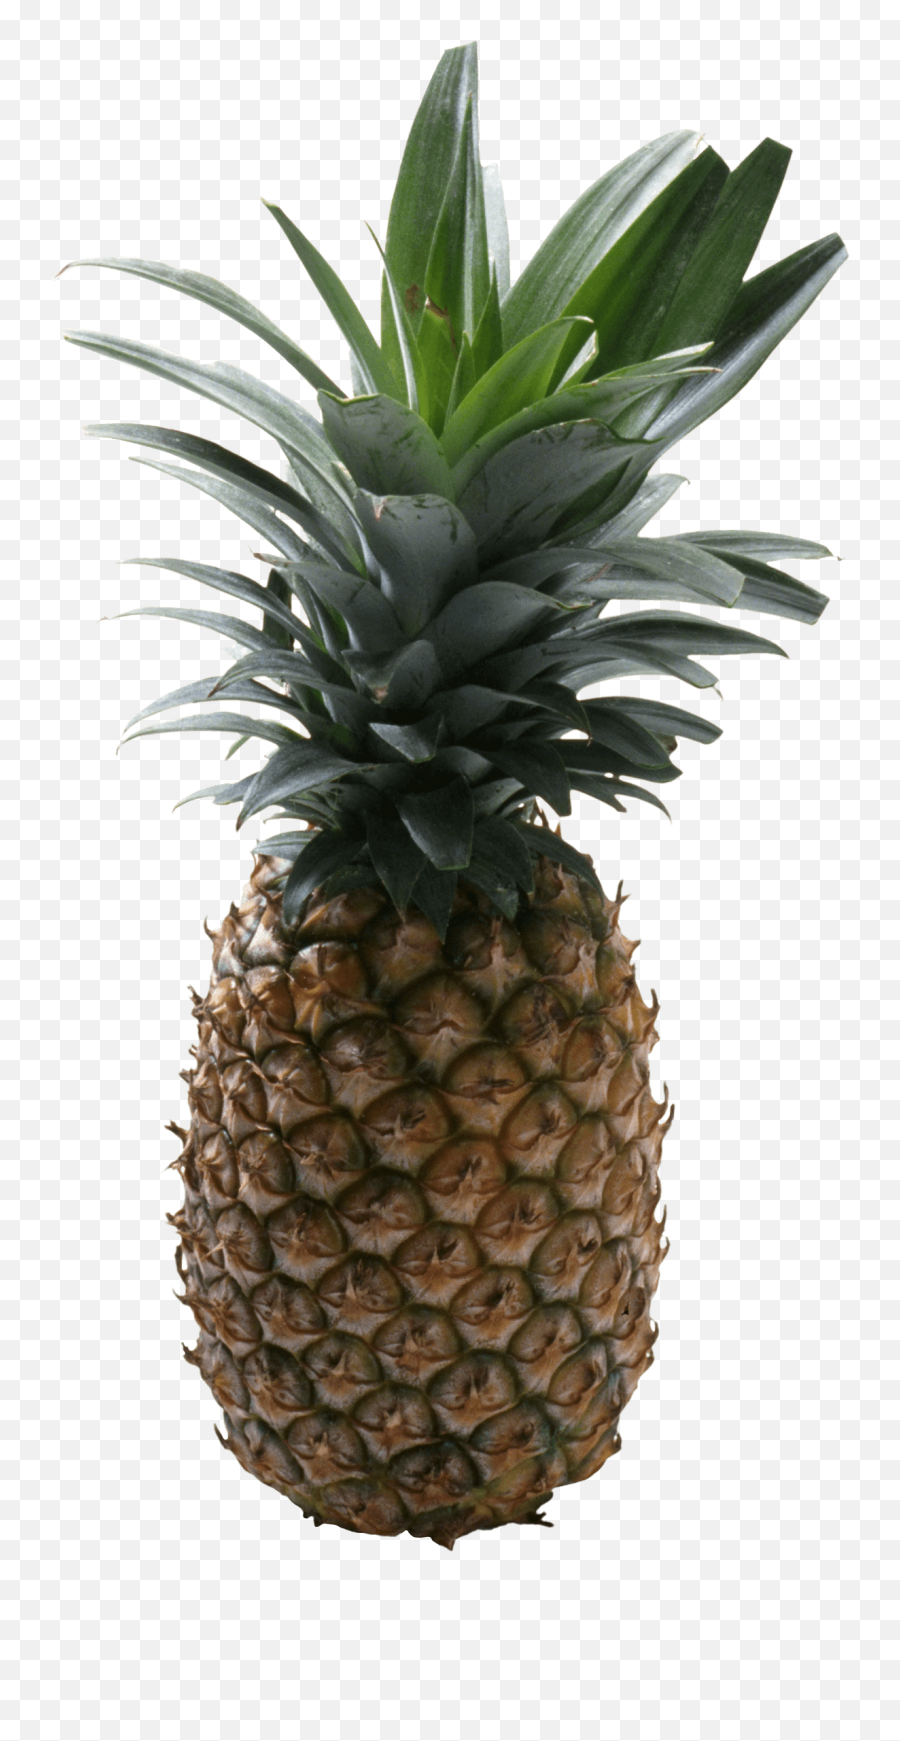 Pineapple Png Images Transparent Free